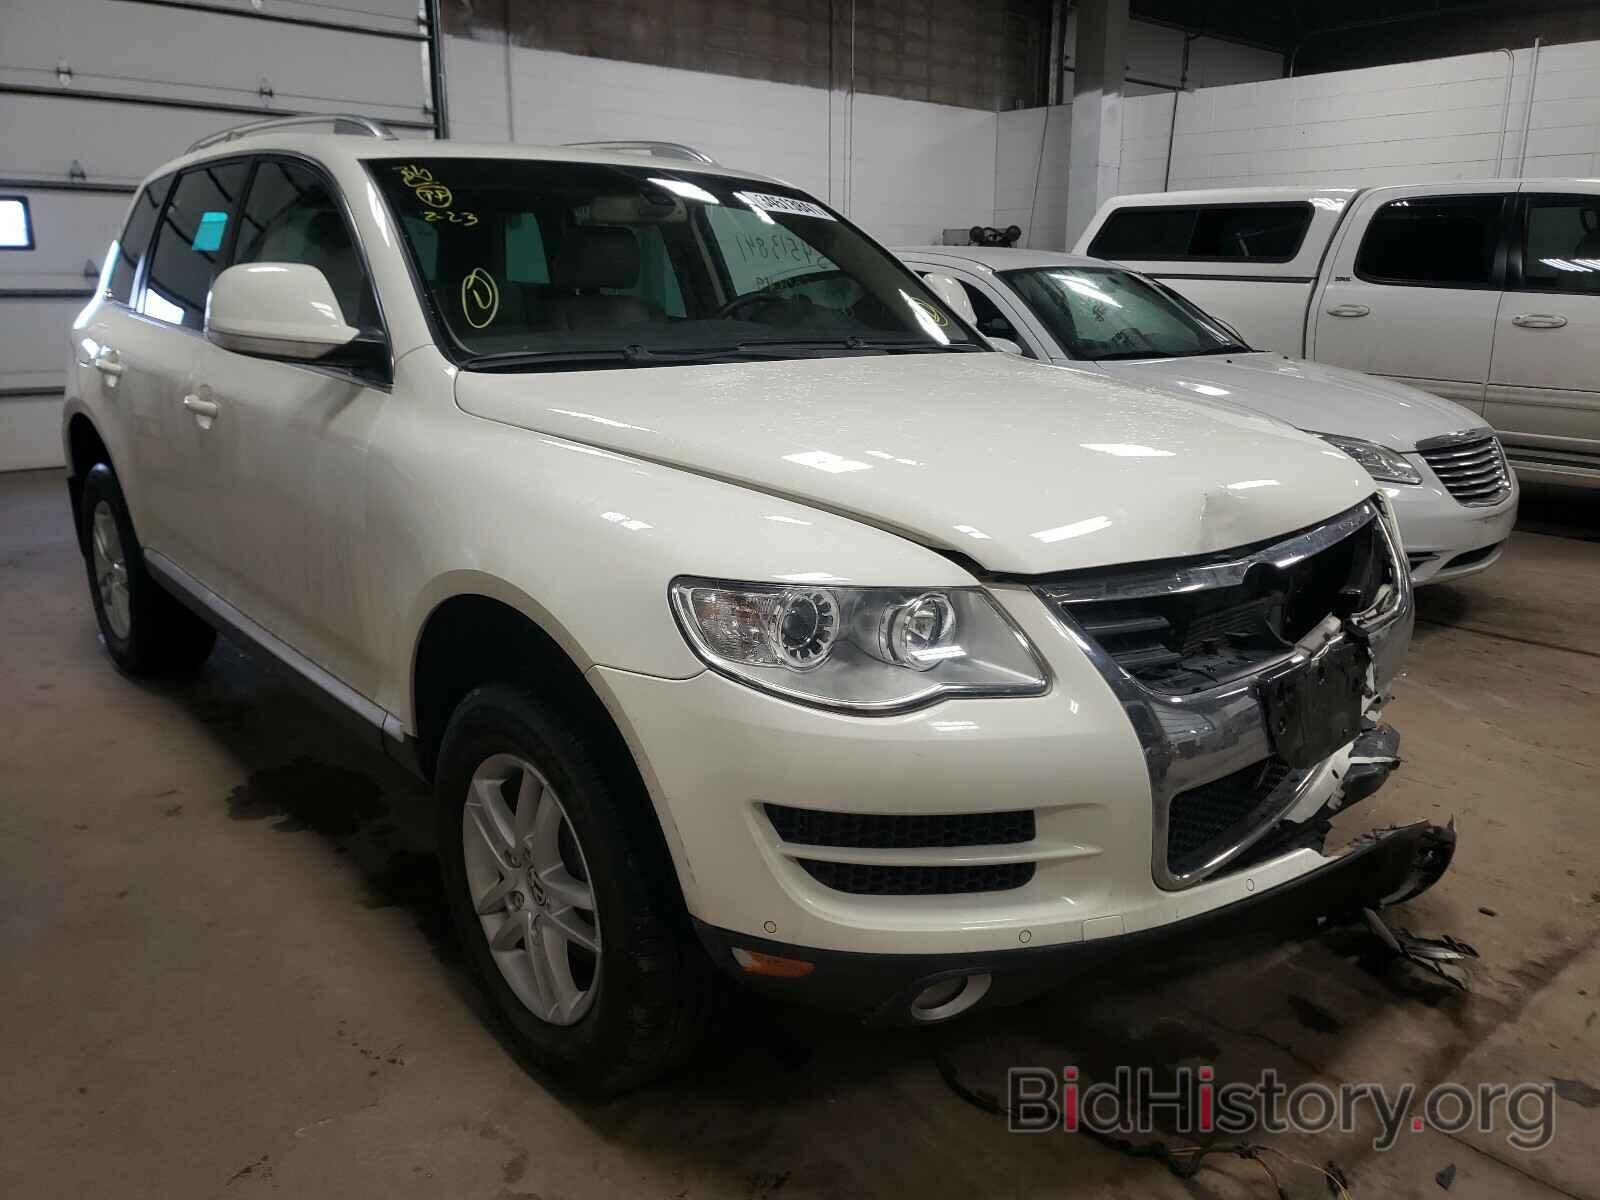 Photo WVGFK7A90AD001150 - VOLKSWAGEN TOUAREG TD 2010